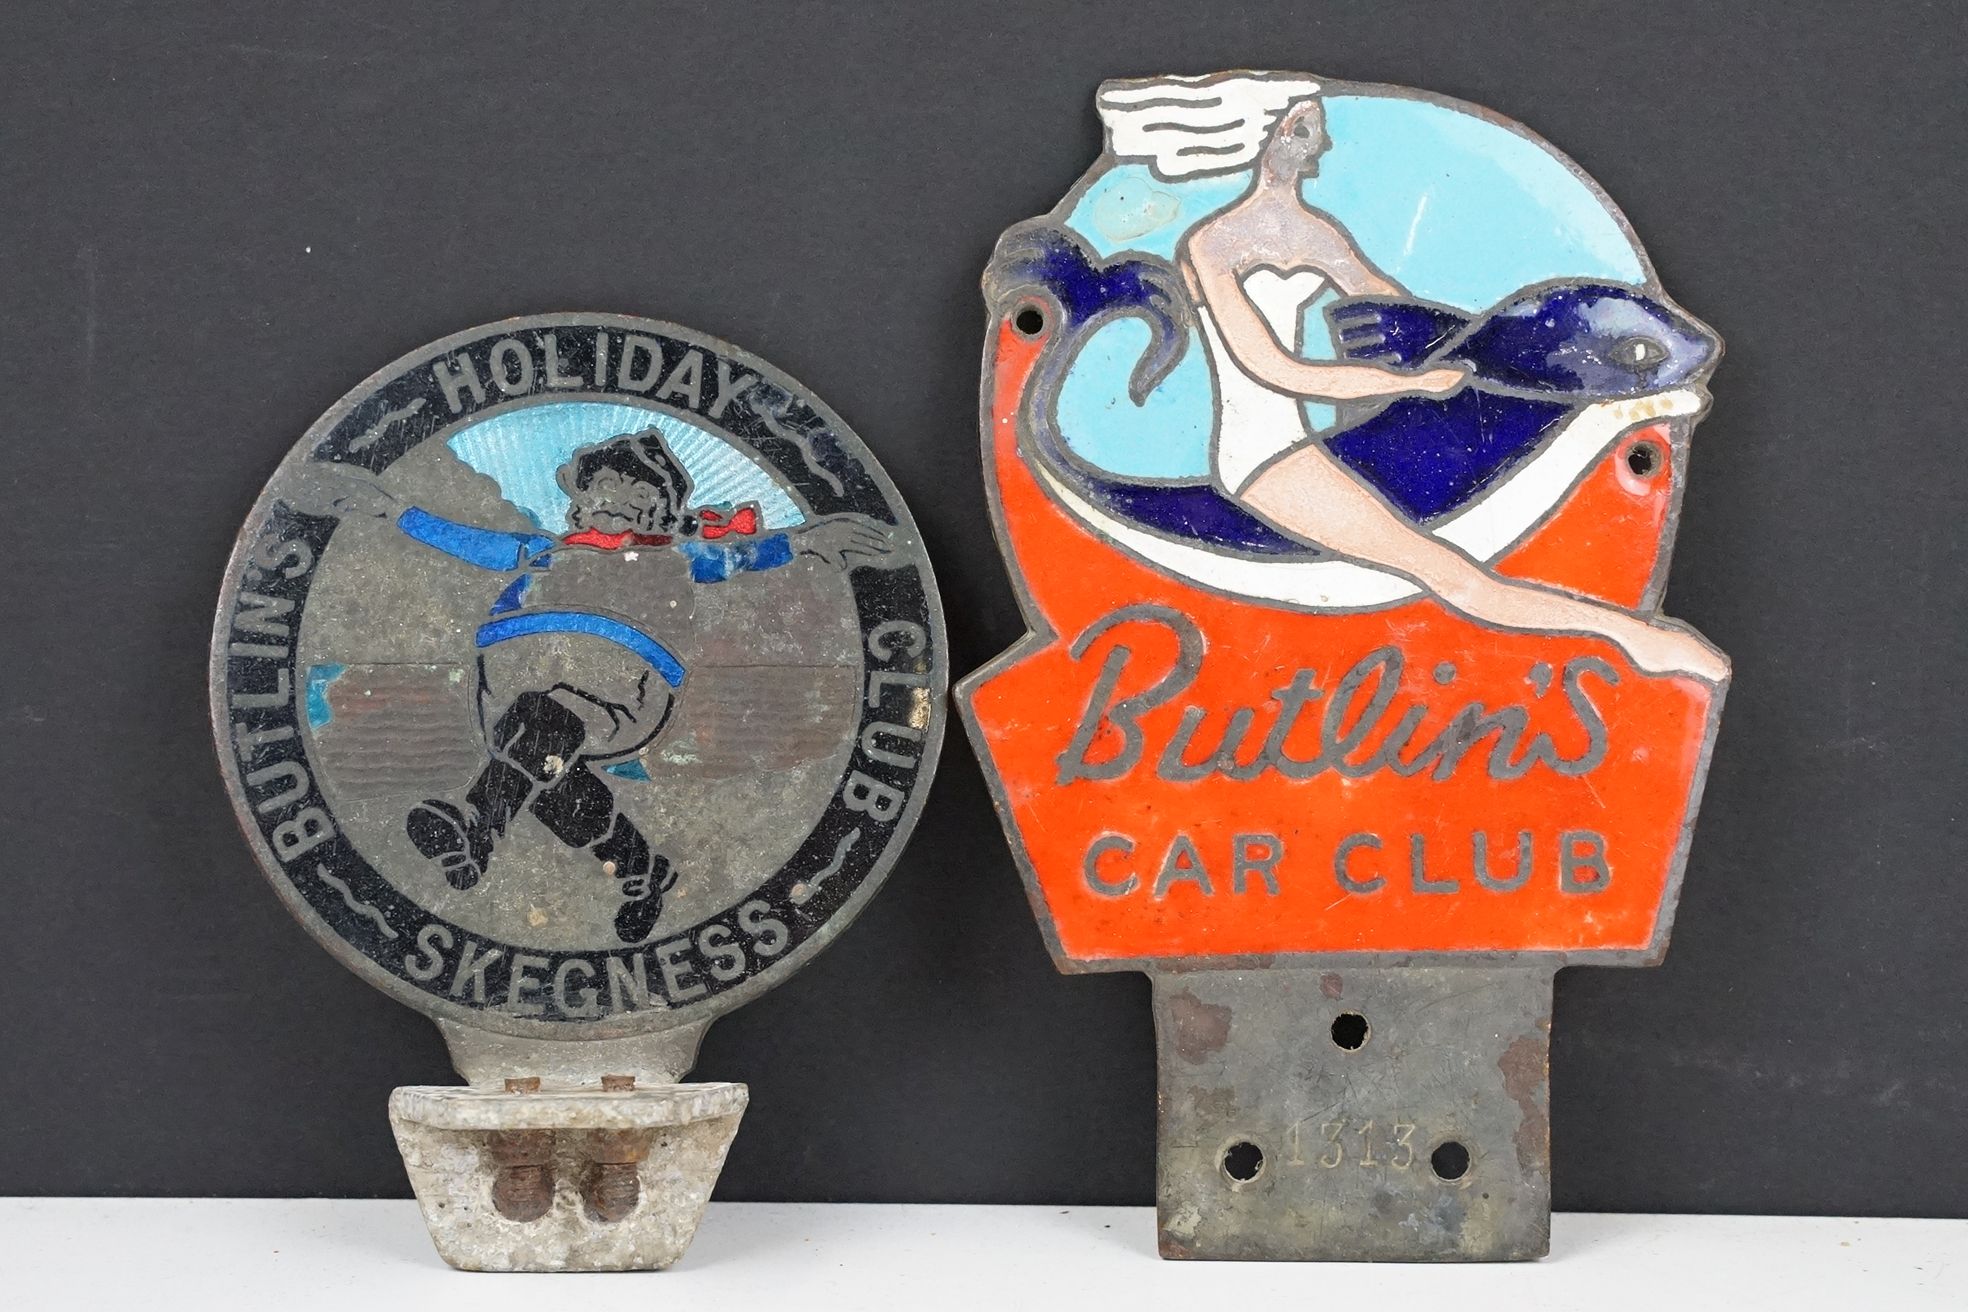 Two vintage Butlin's enamelled car badges to include Butlin's Car club (approx 14.5cm long) and